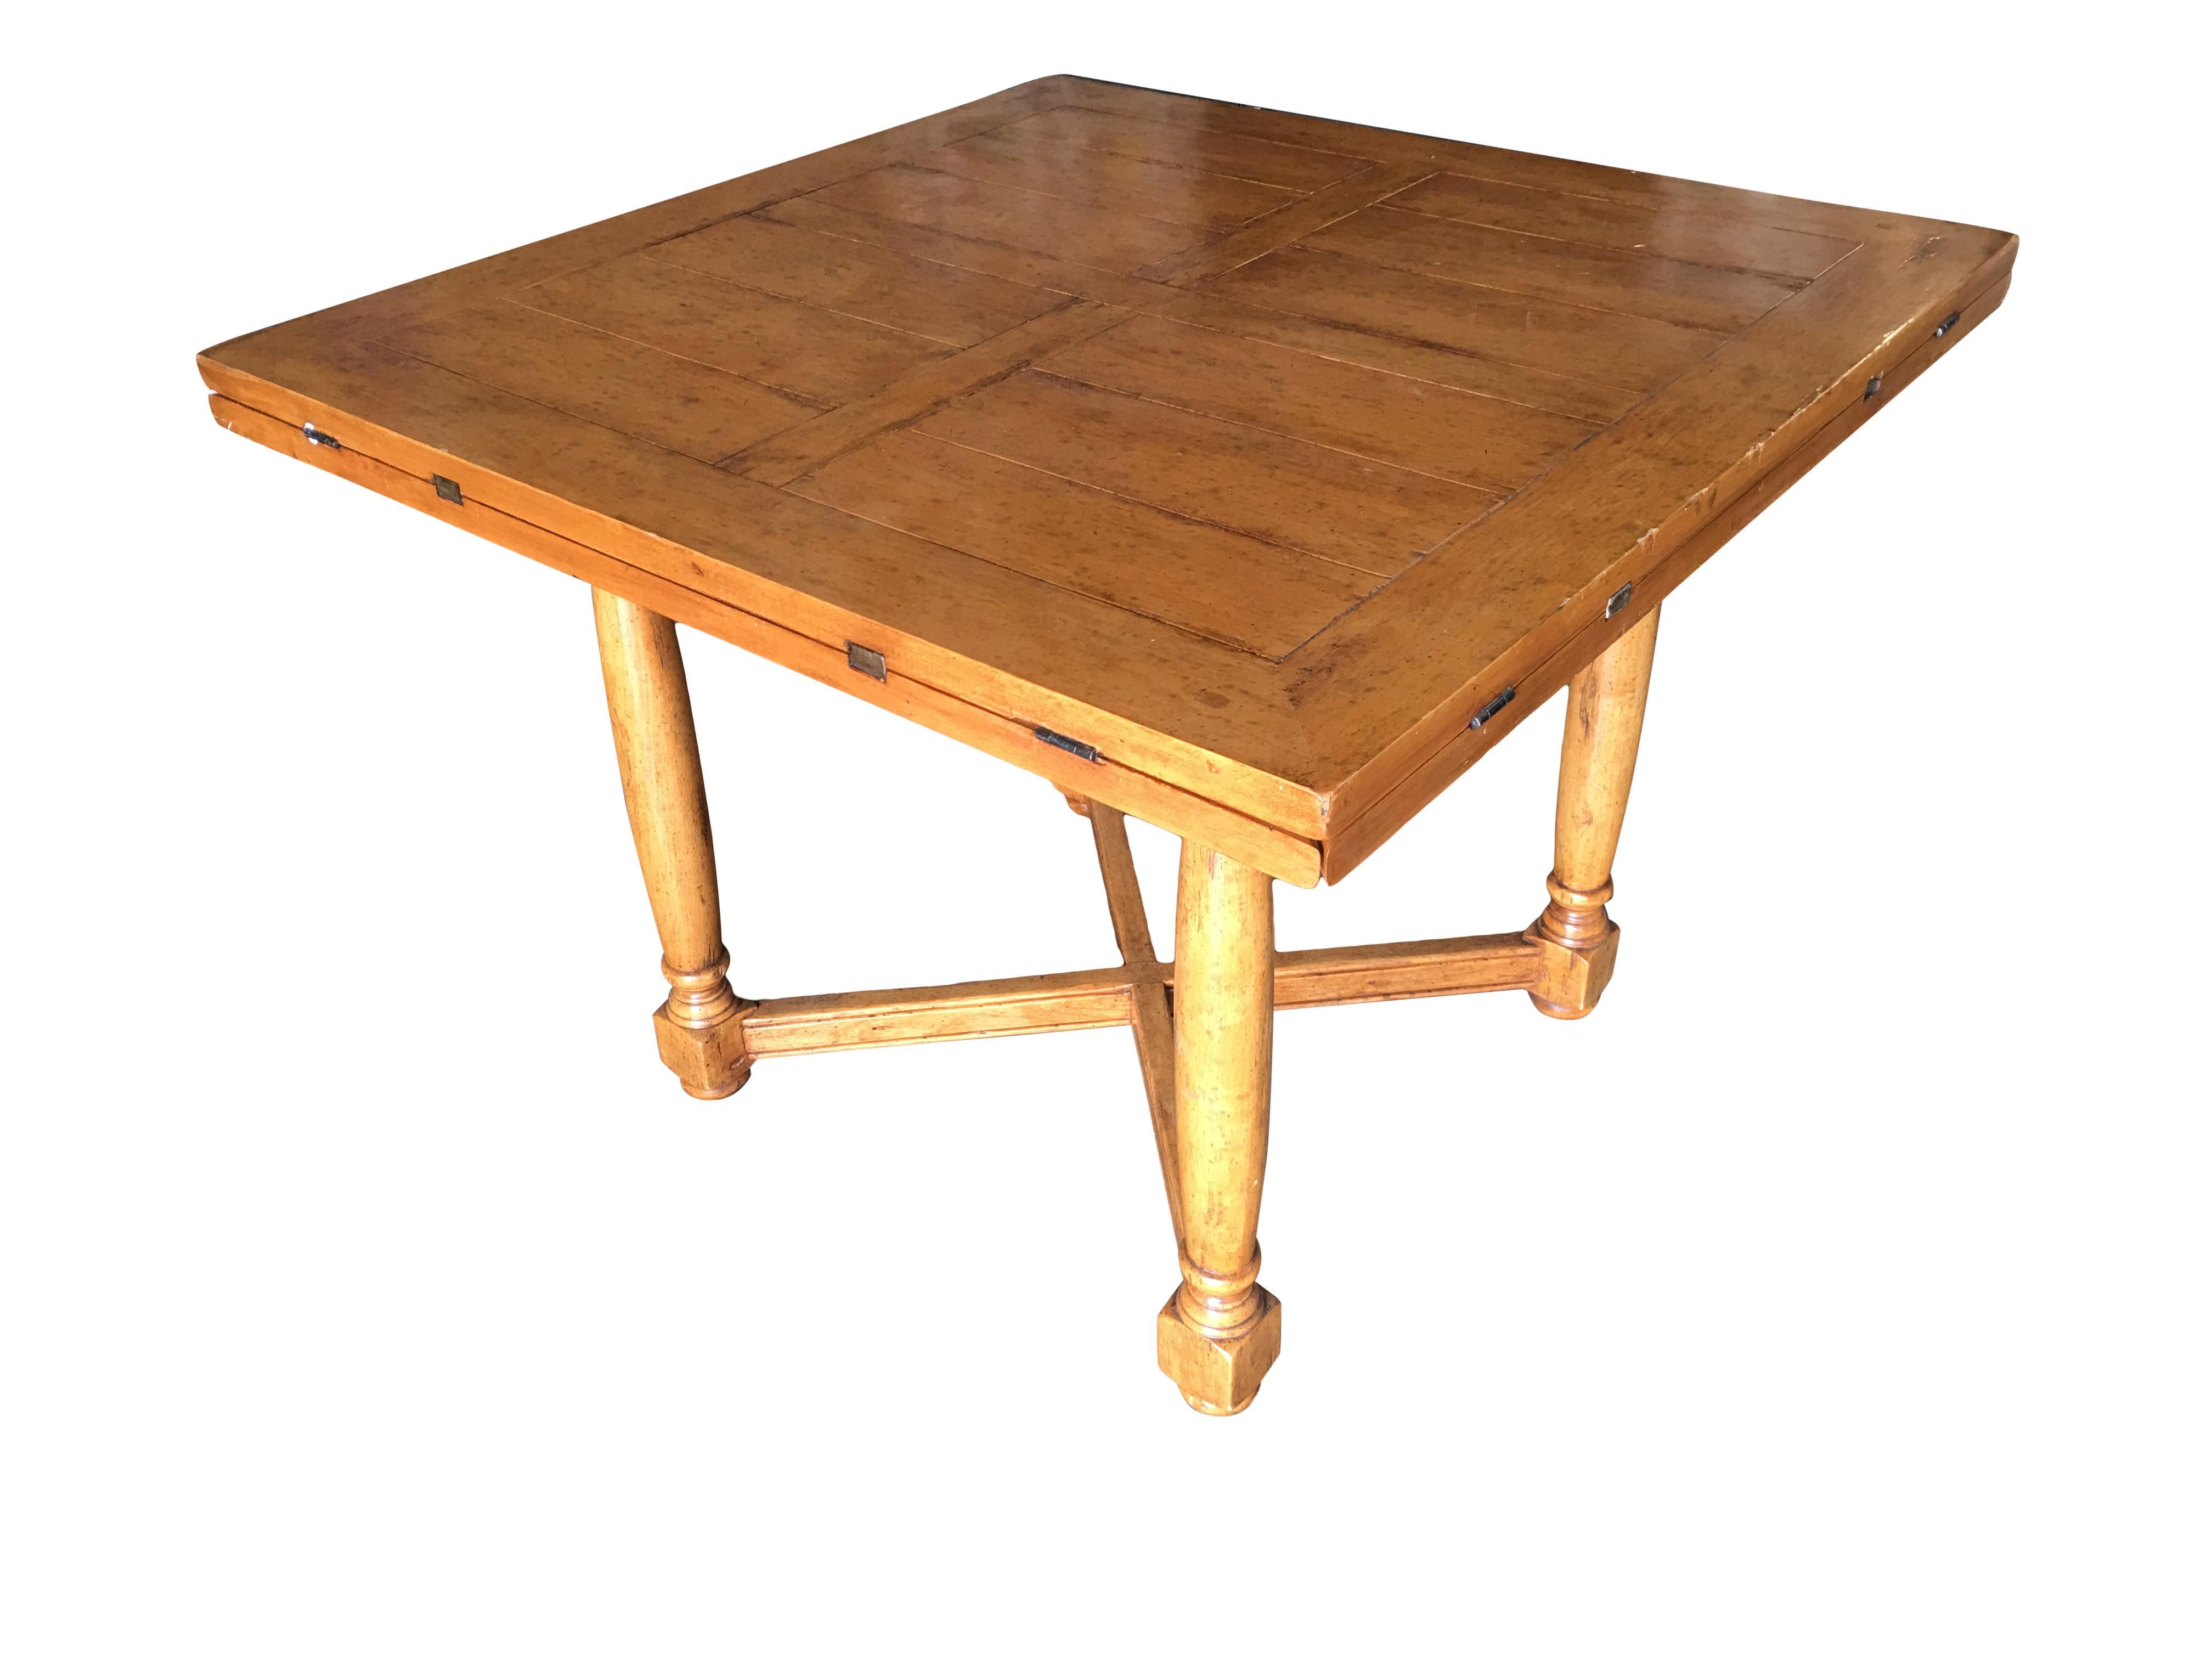 Custom handcrafted oak drop-leaf gate leg dining and a game table featuring a unique design. The table starts off as square four-person dining table with four drop leaves that extend to transform the table into a round gaming table. Each drop leaf